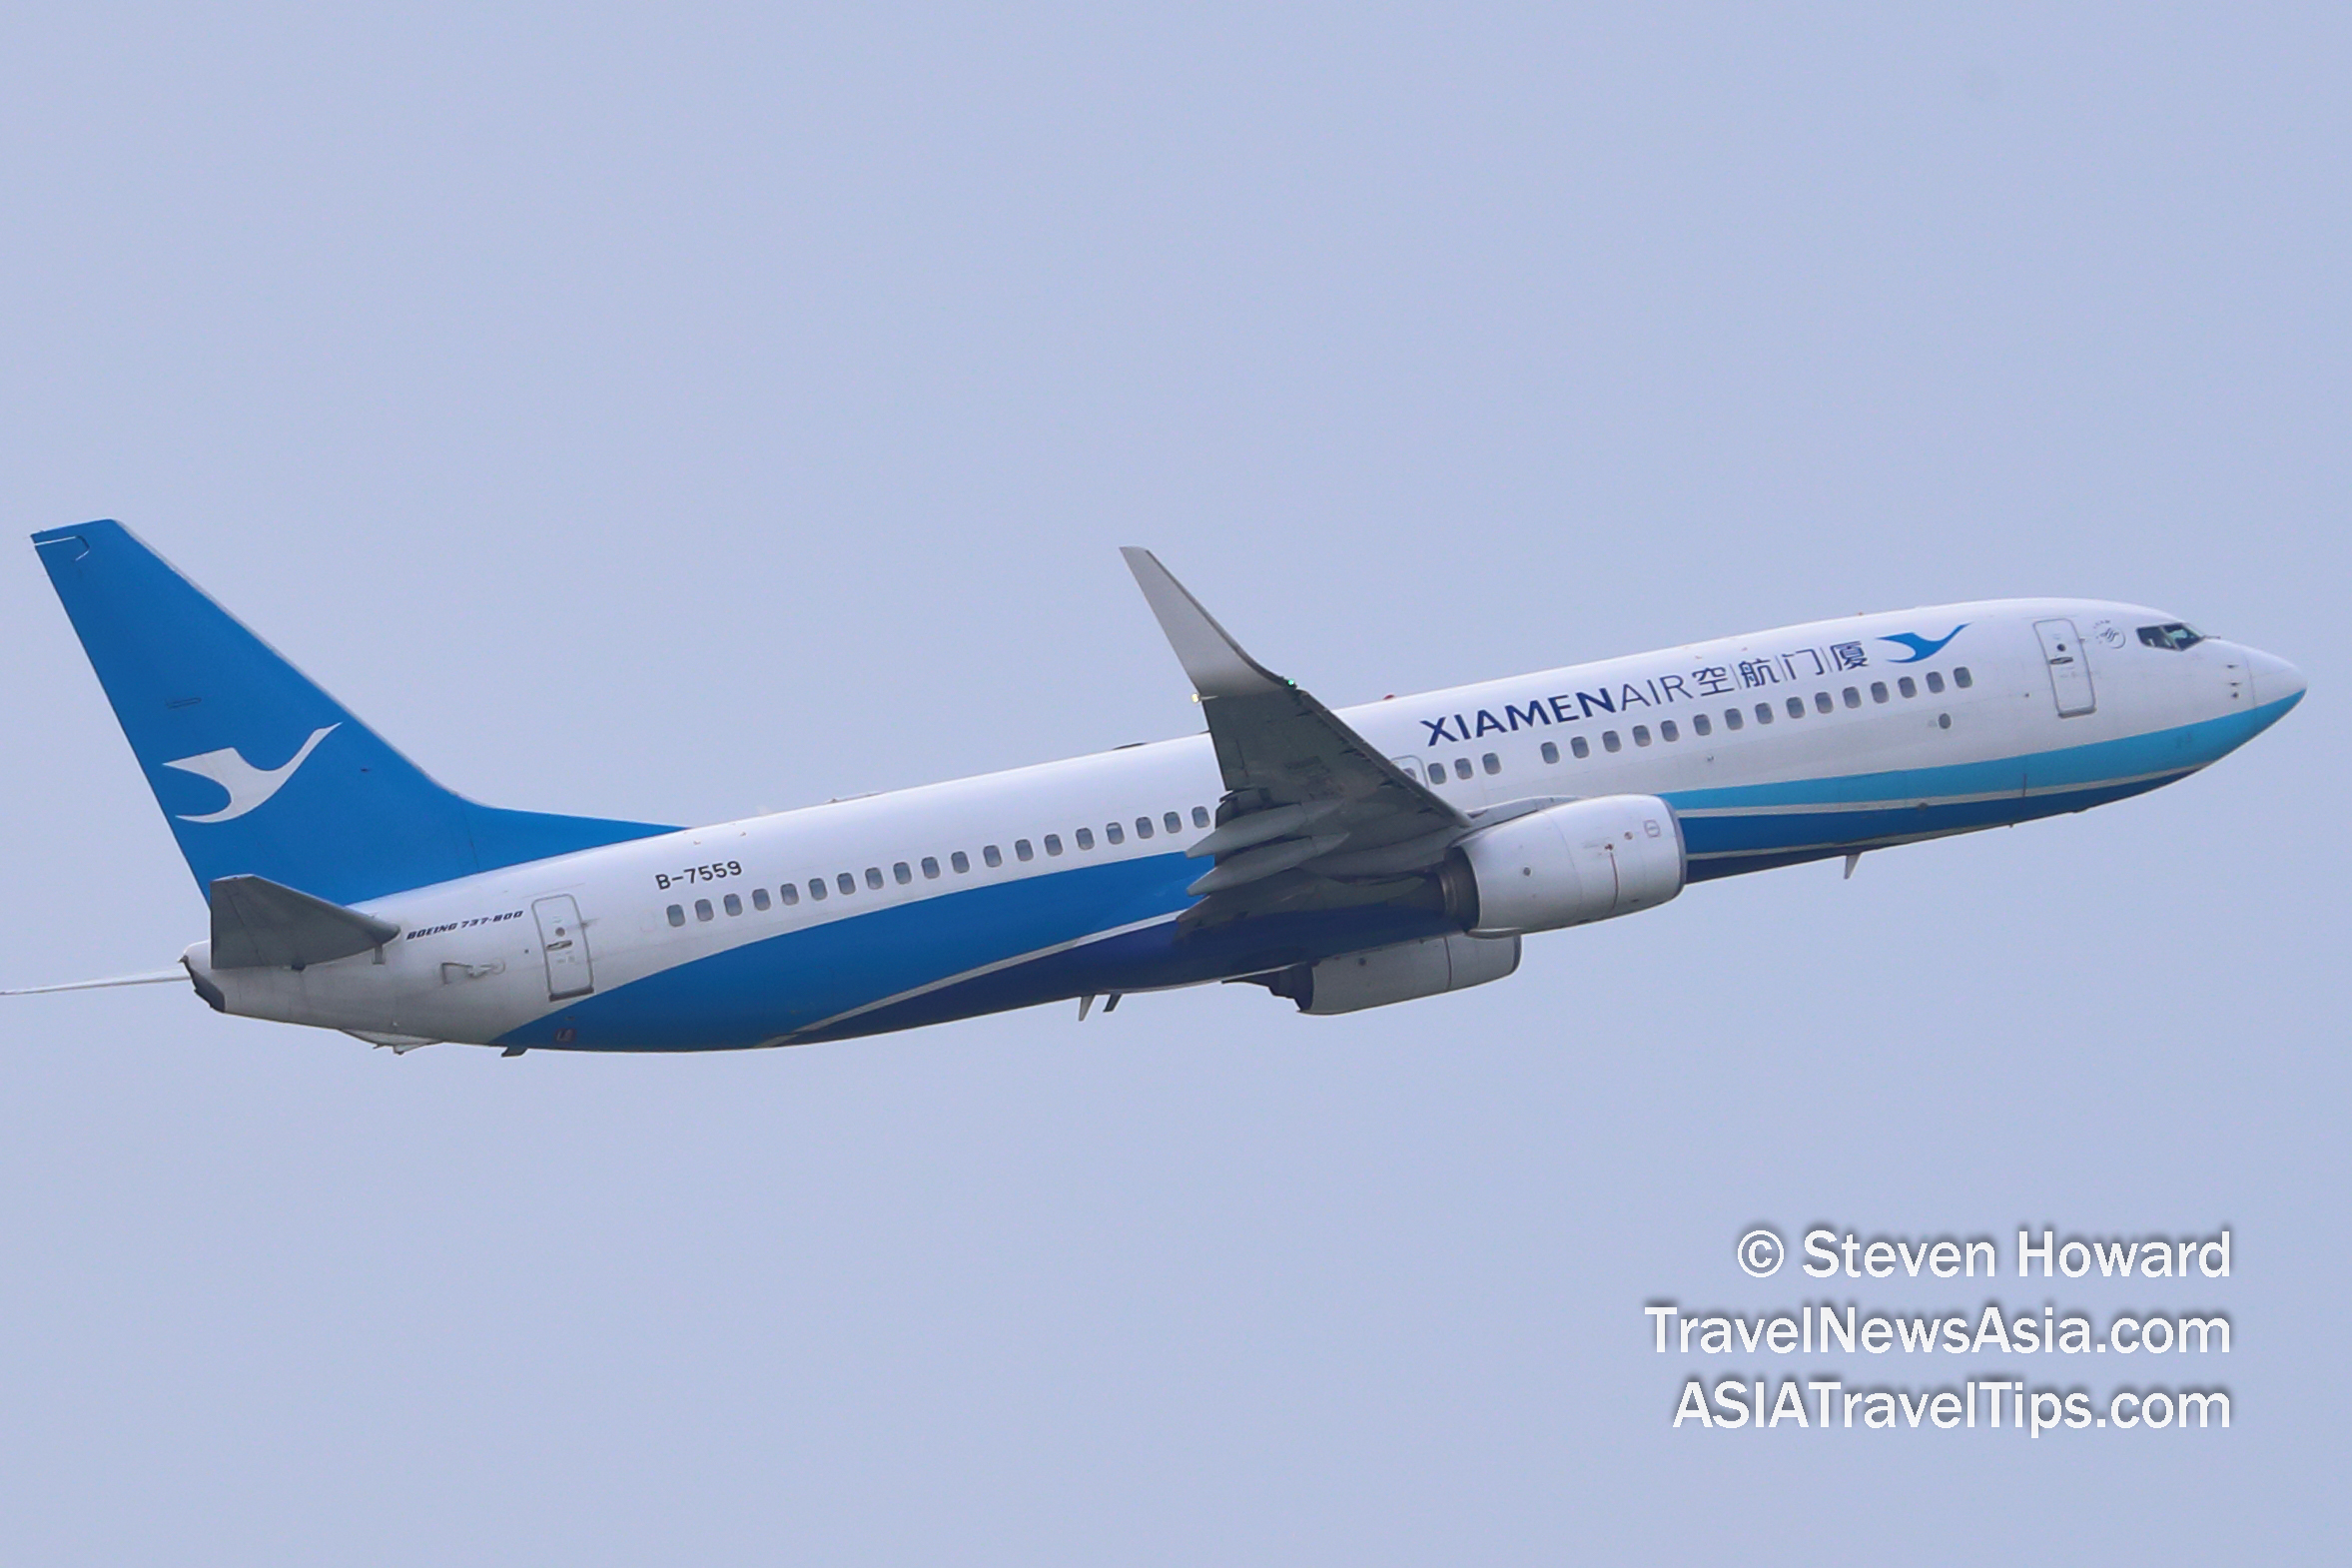 Xiamen Air Boeing 737 reg: B-7559. Picture by Steven Howard of TravelNewsAsia.com. Click to enlarge.